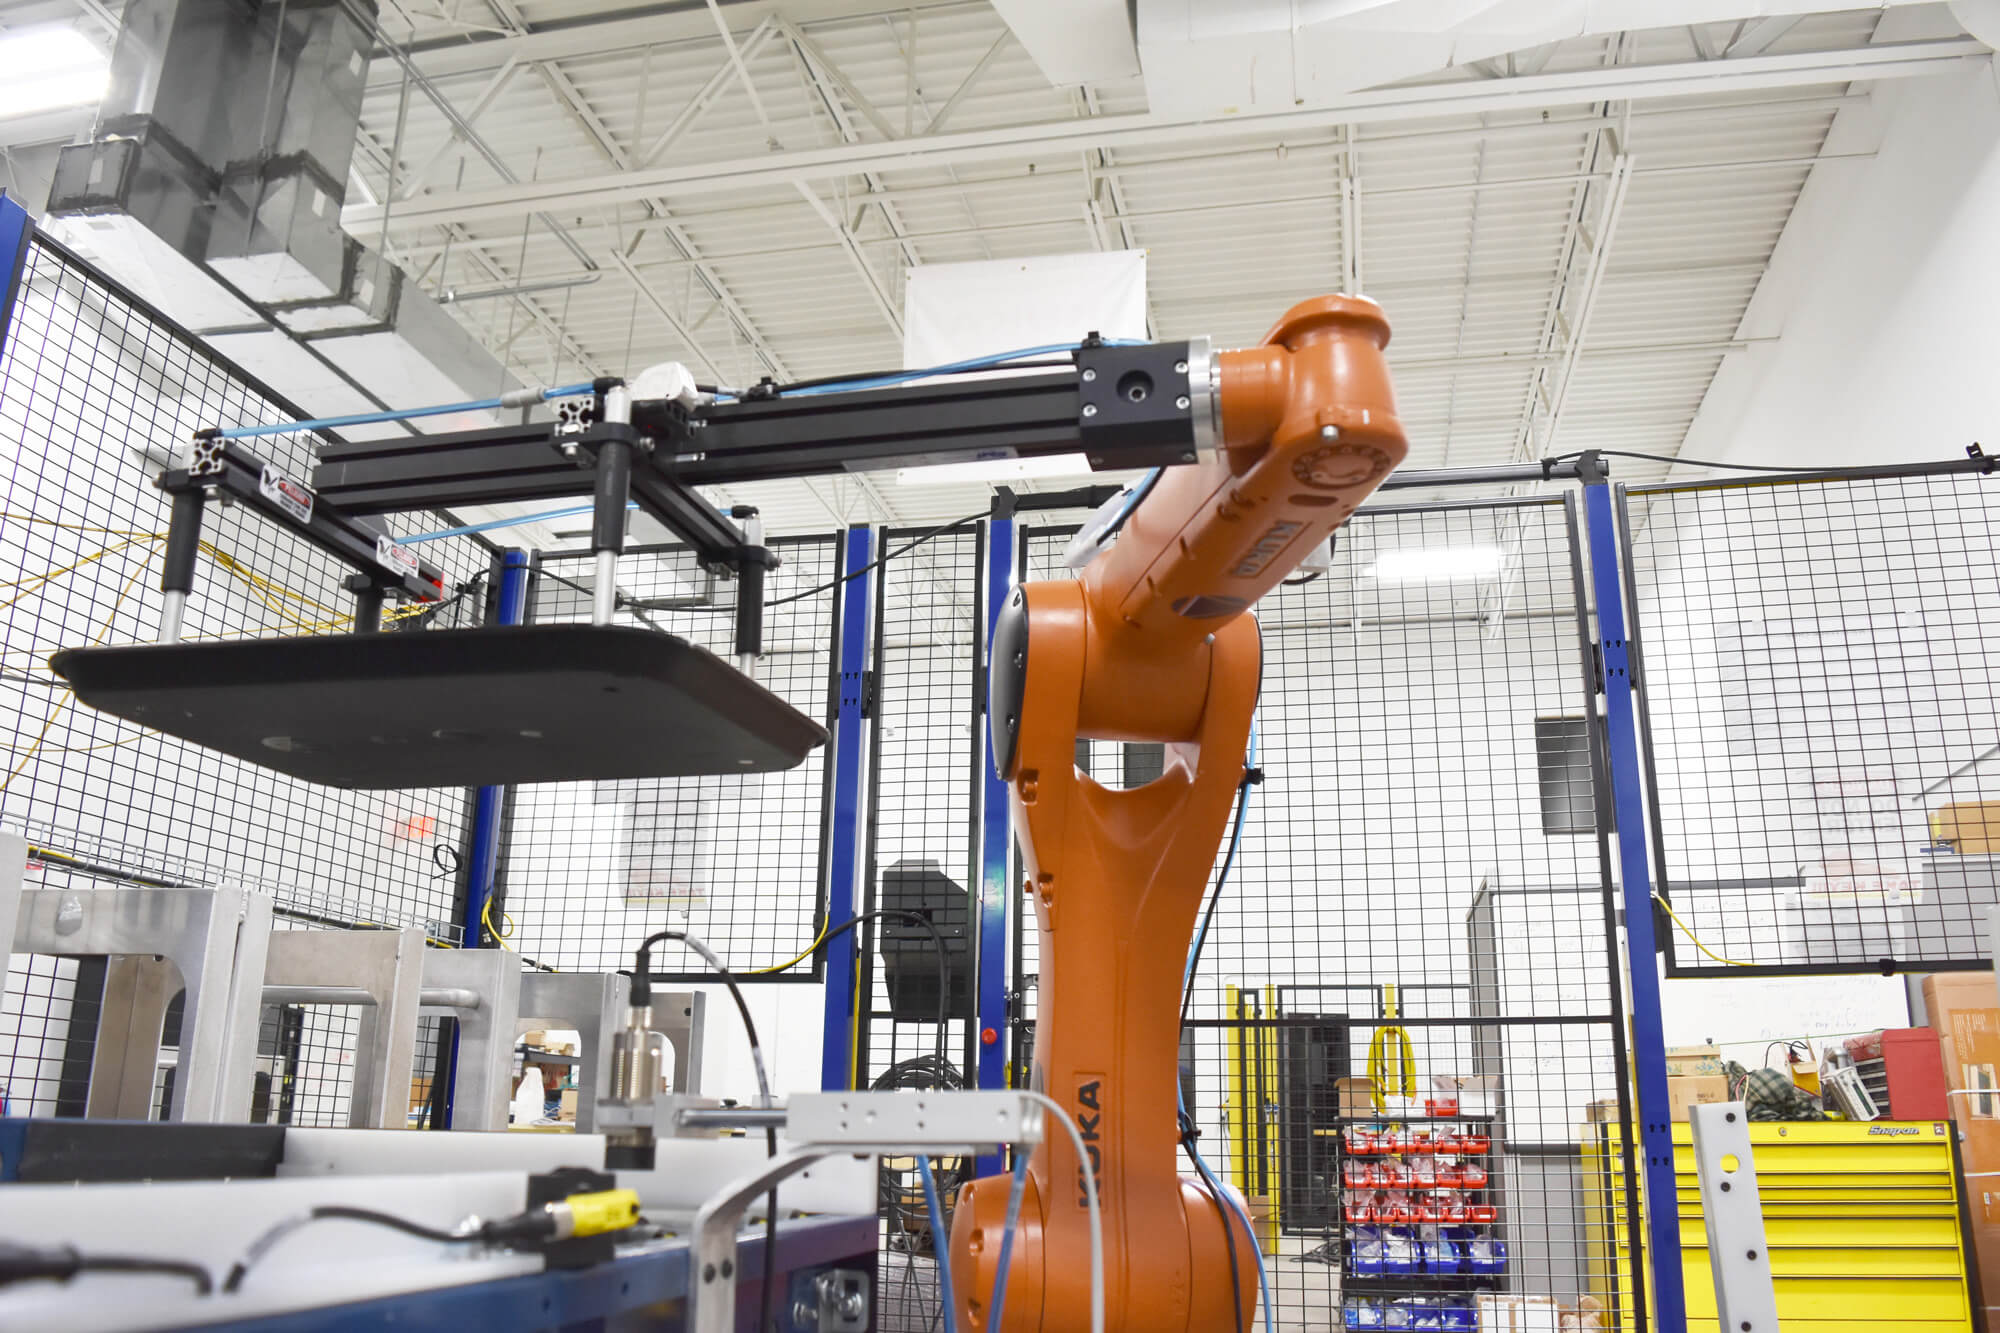 Large Kuka robot working at a production line